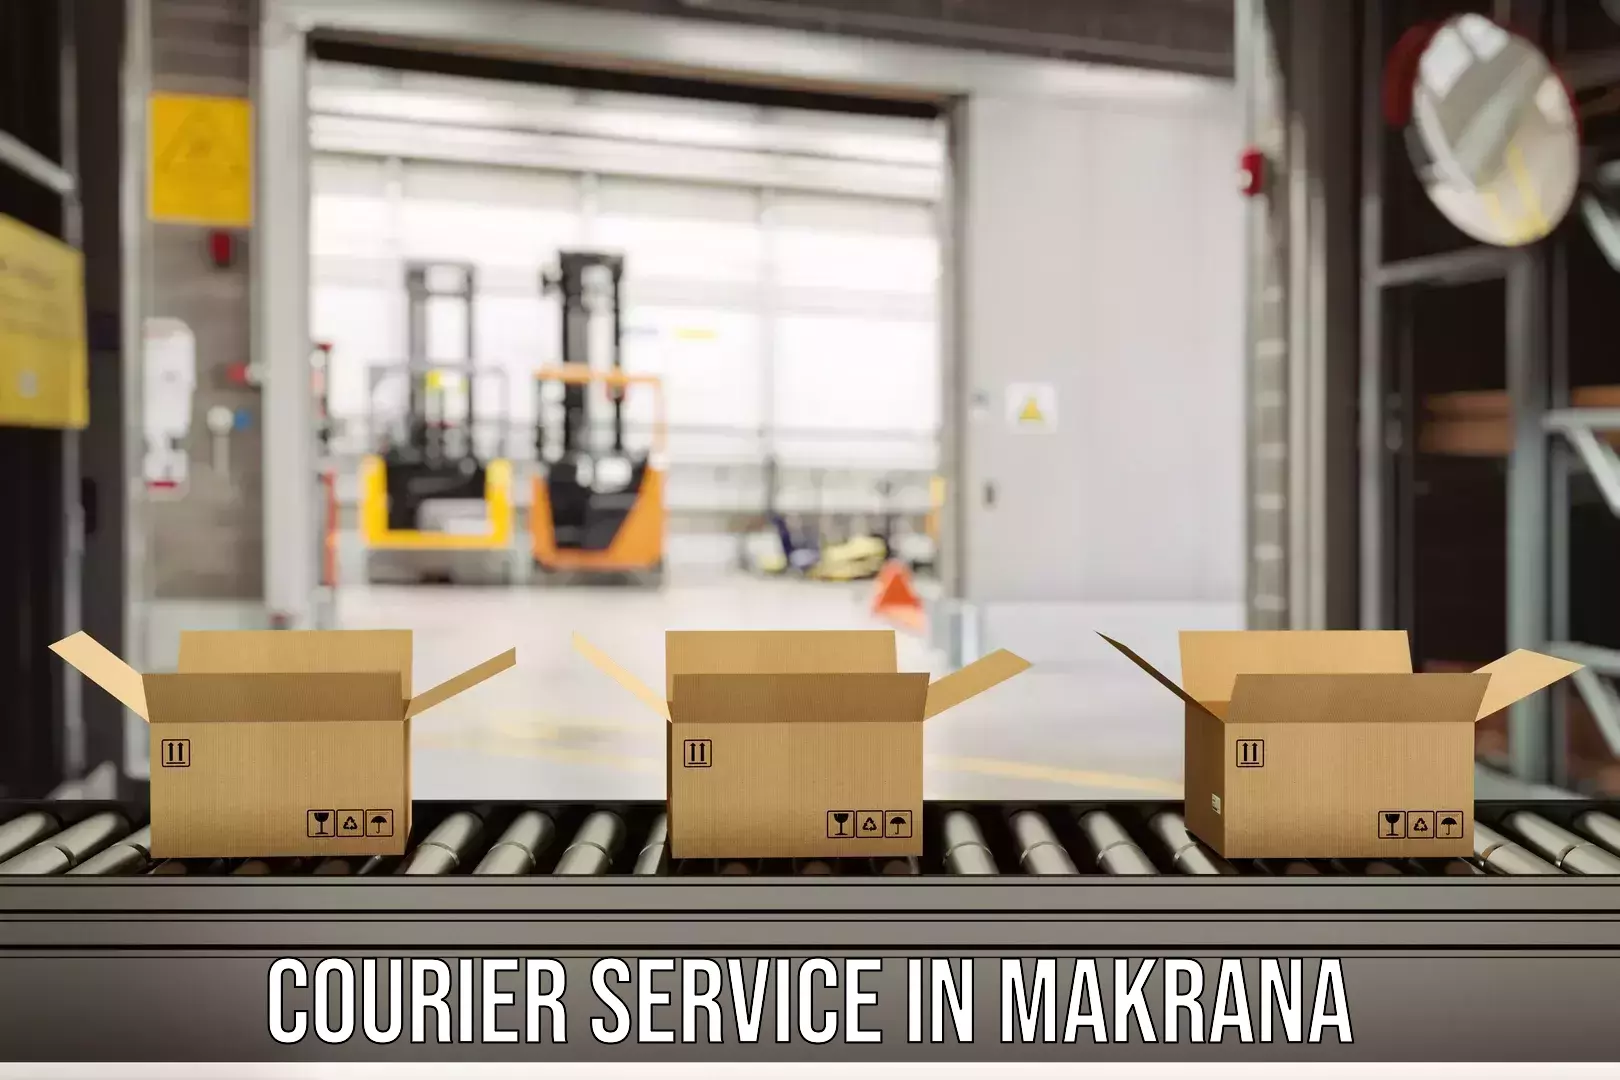 Courier service booking in Makrana